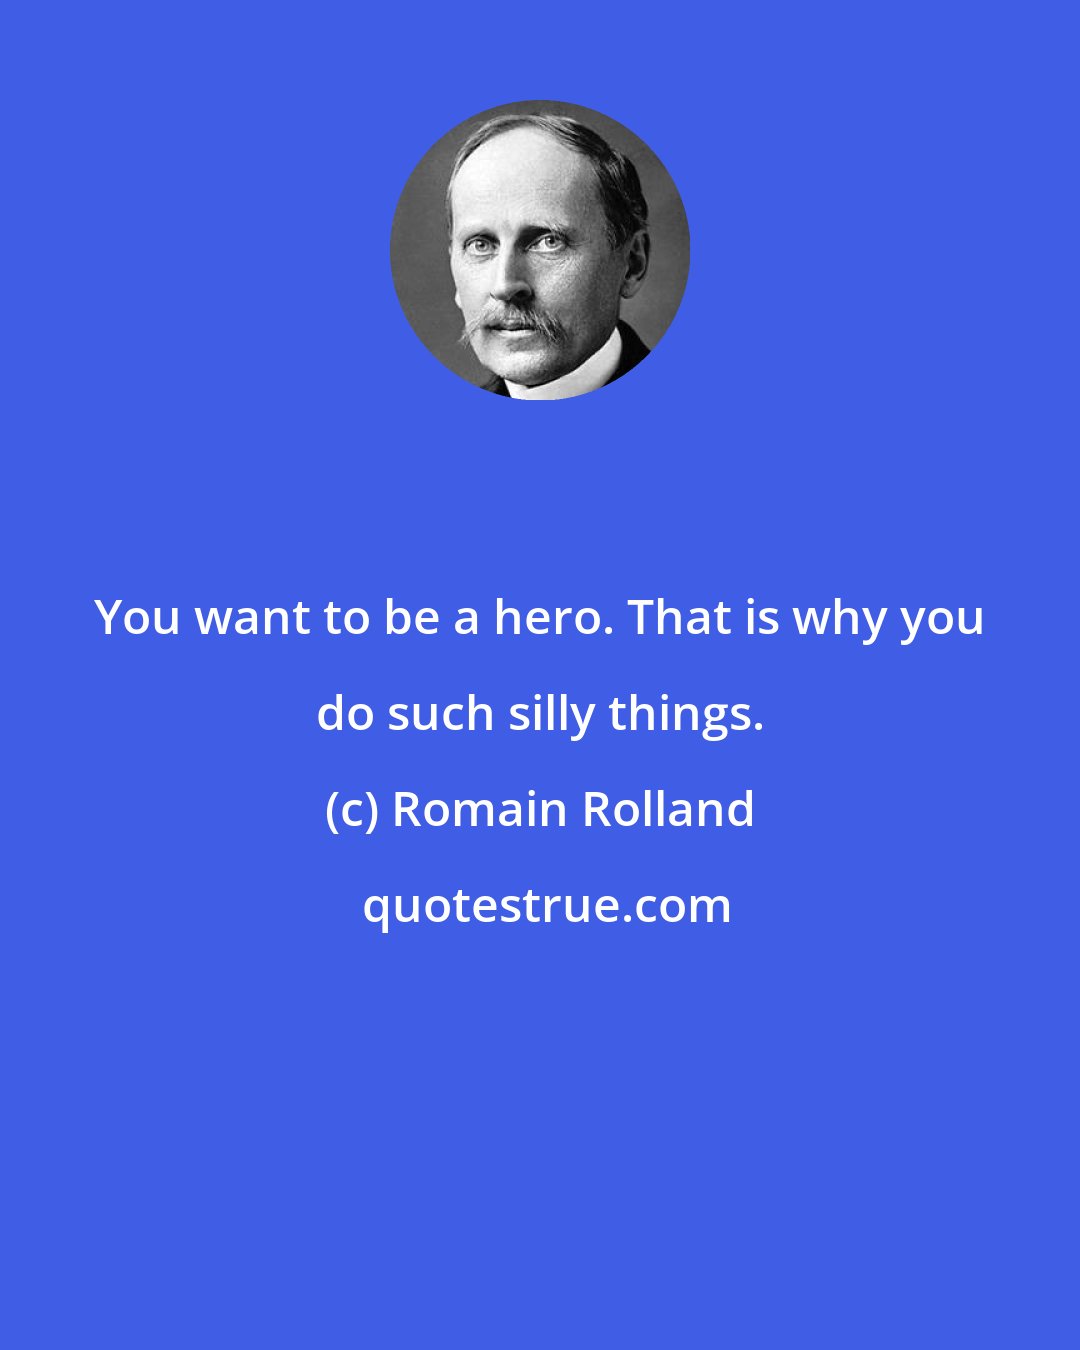 Romain Rolland: You want to be a hero. That is why you do such silly things.